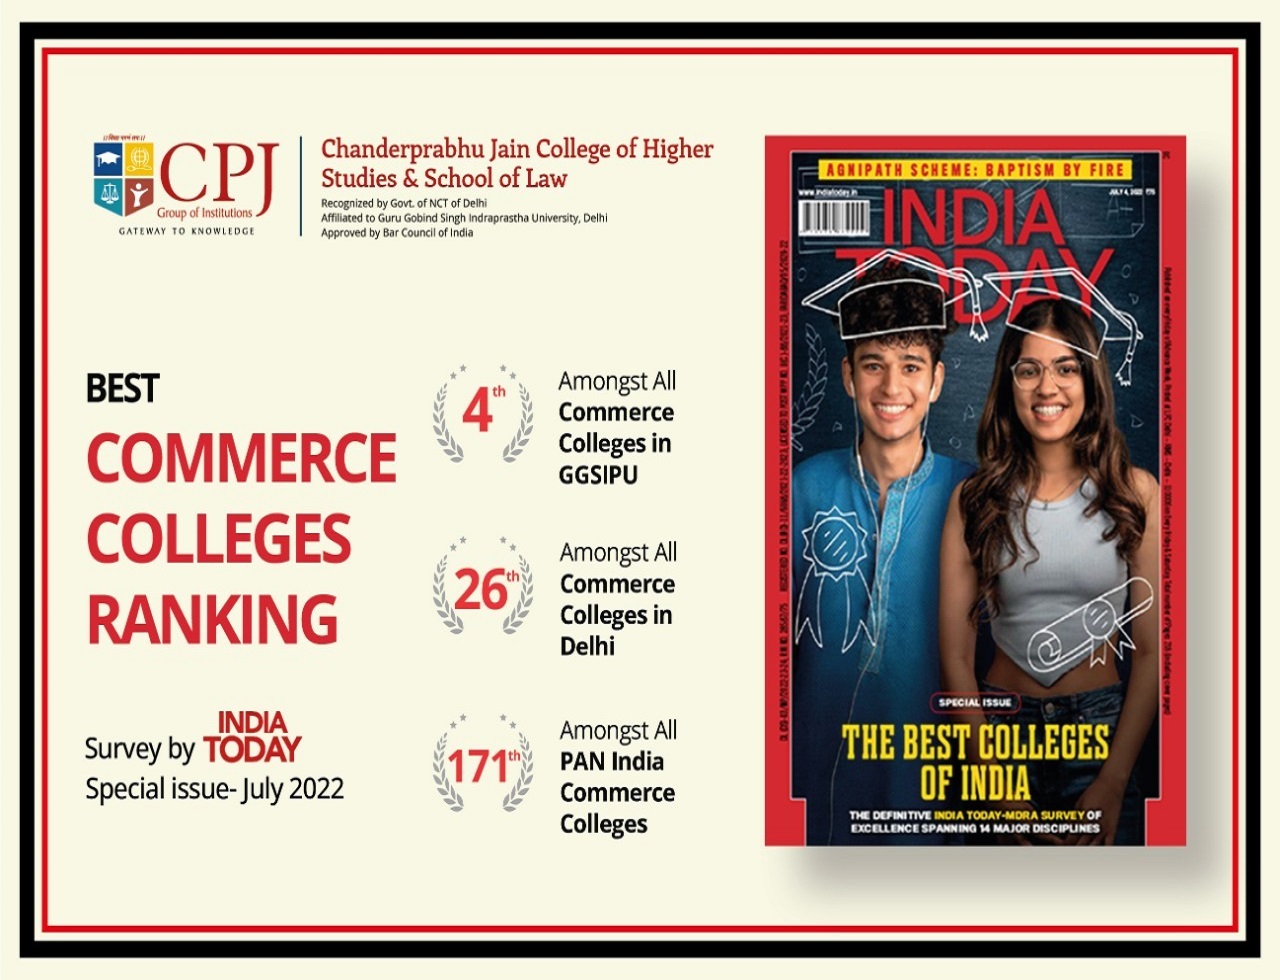 India Today Survey in the Category of Best Commerce Colleges